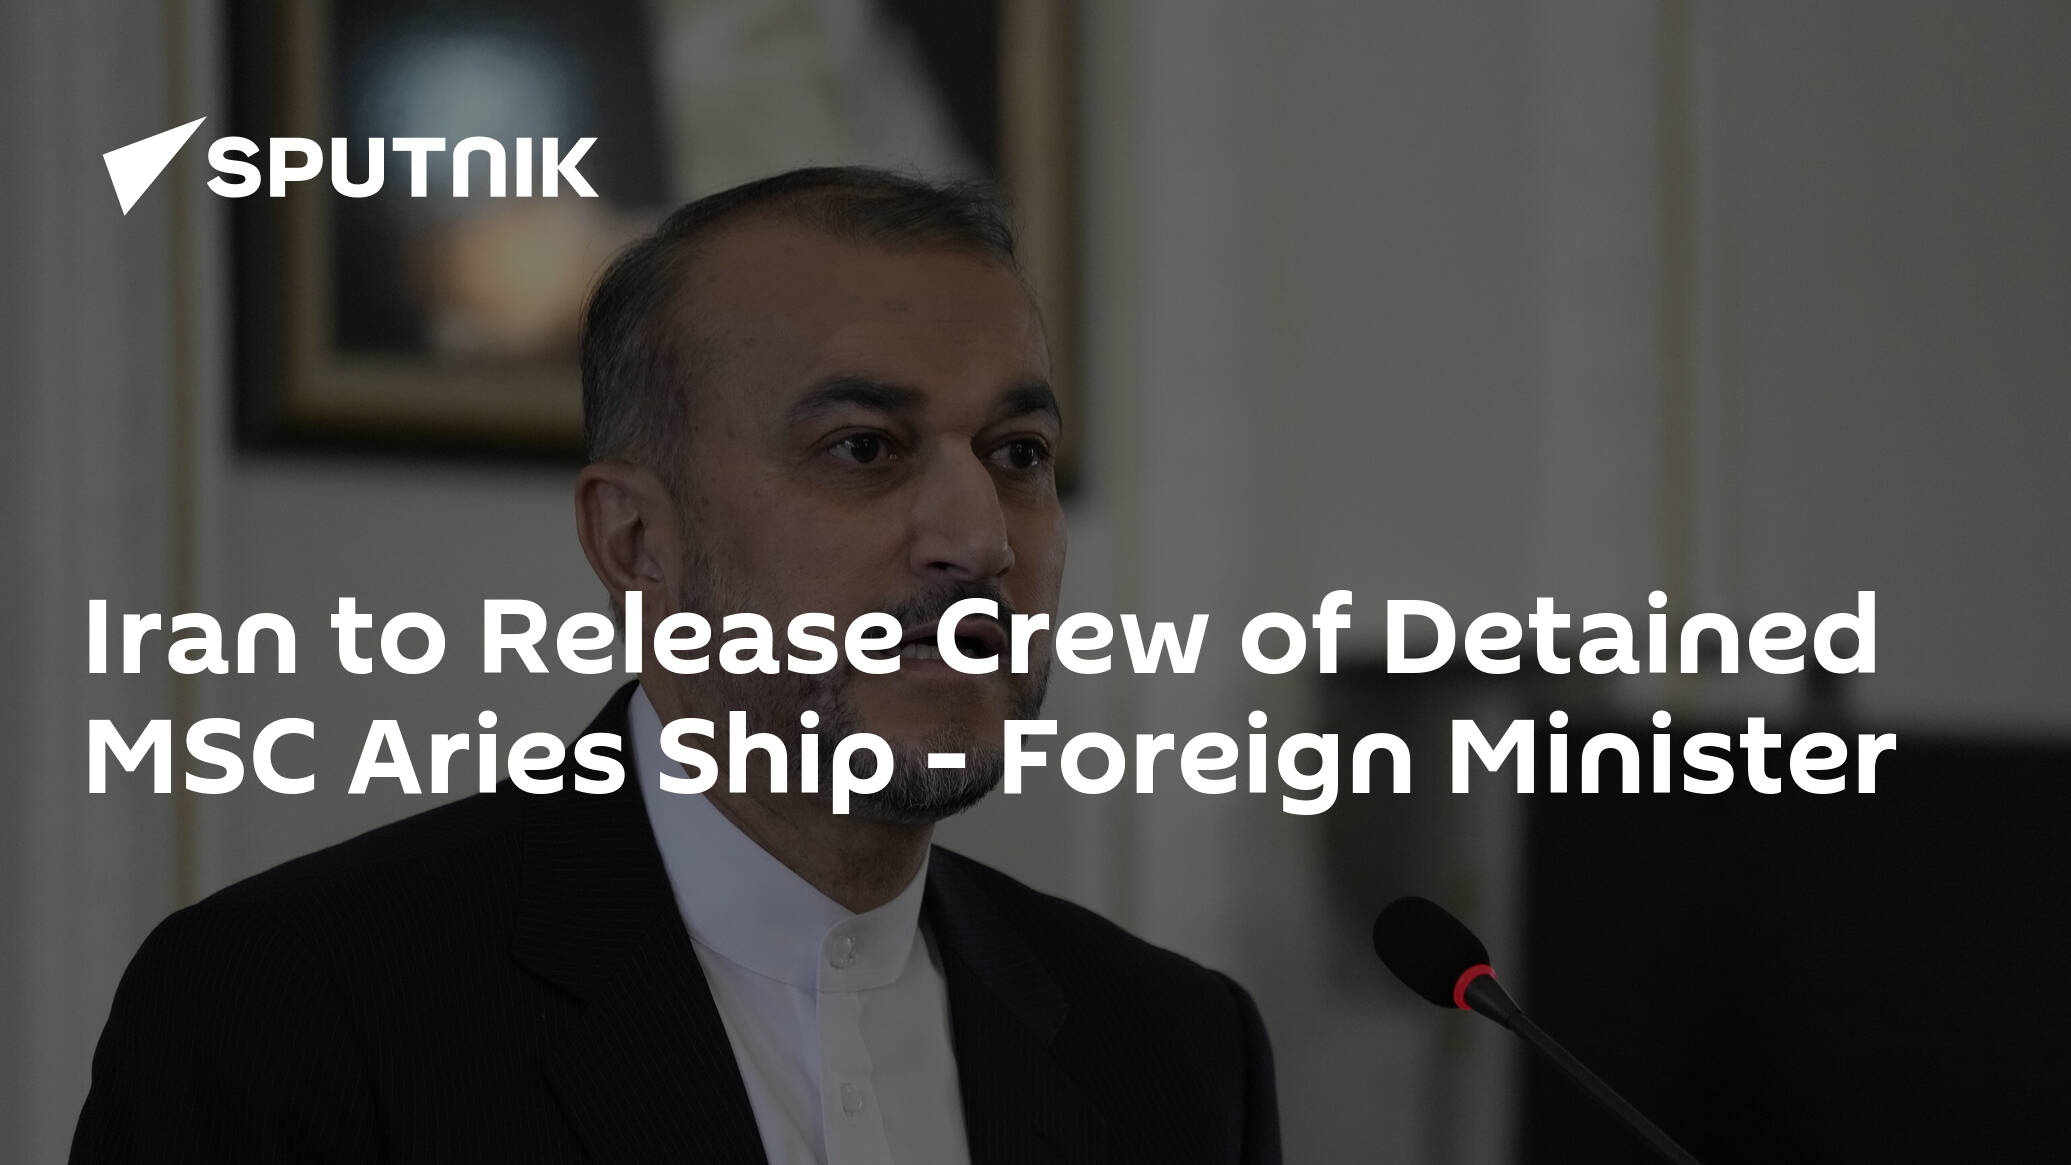 Iran to Release Crew of Detained MSC Aries Ship - Foreign Minister